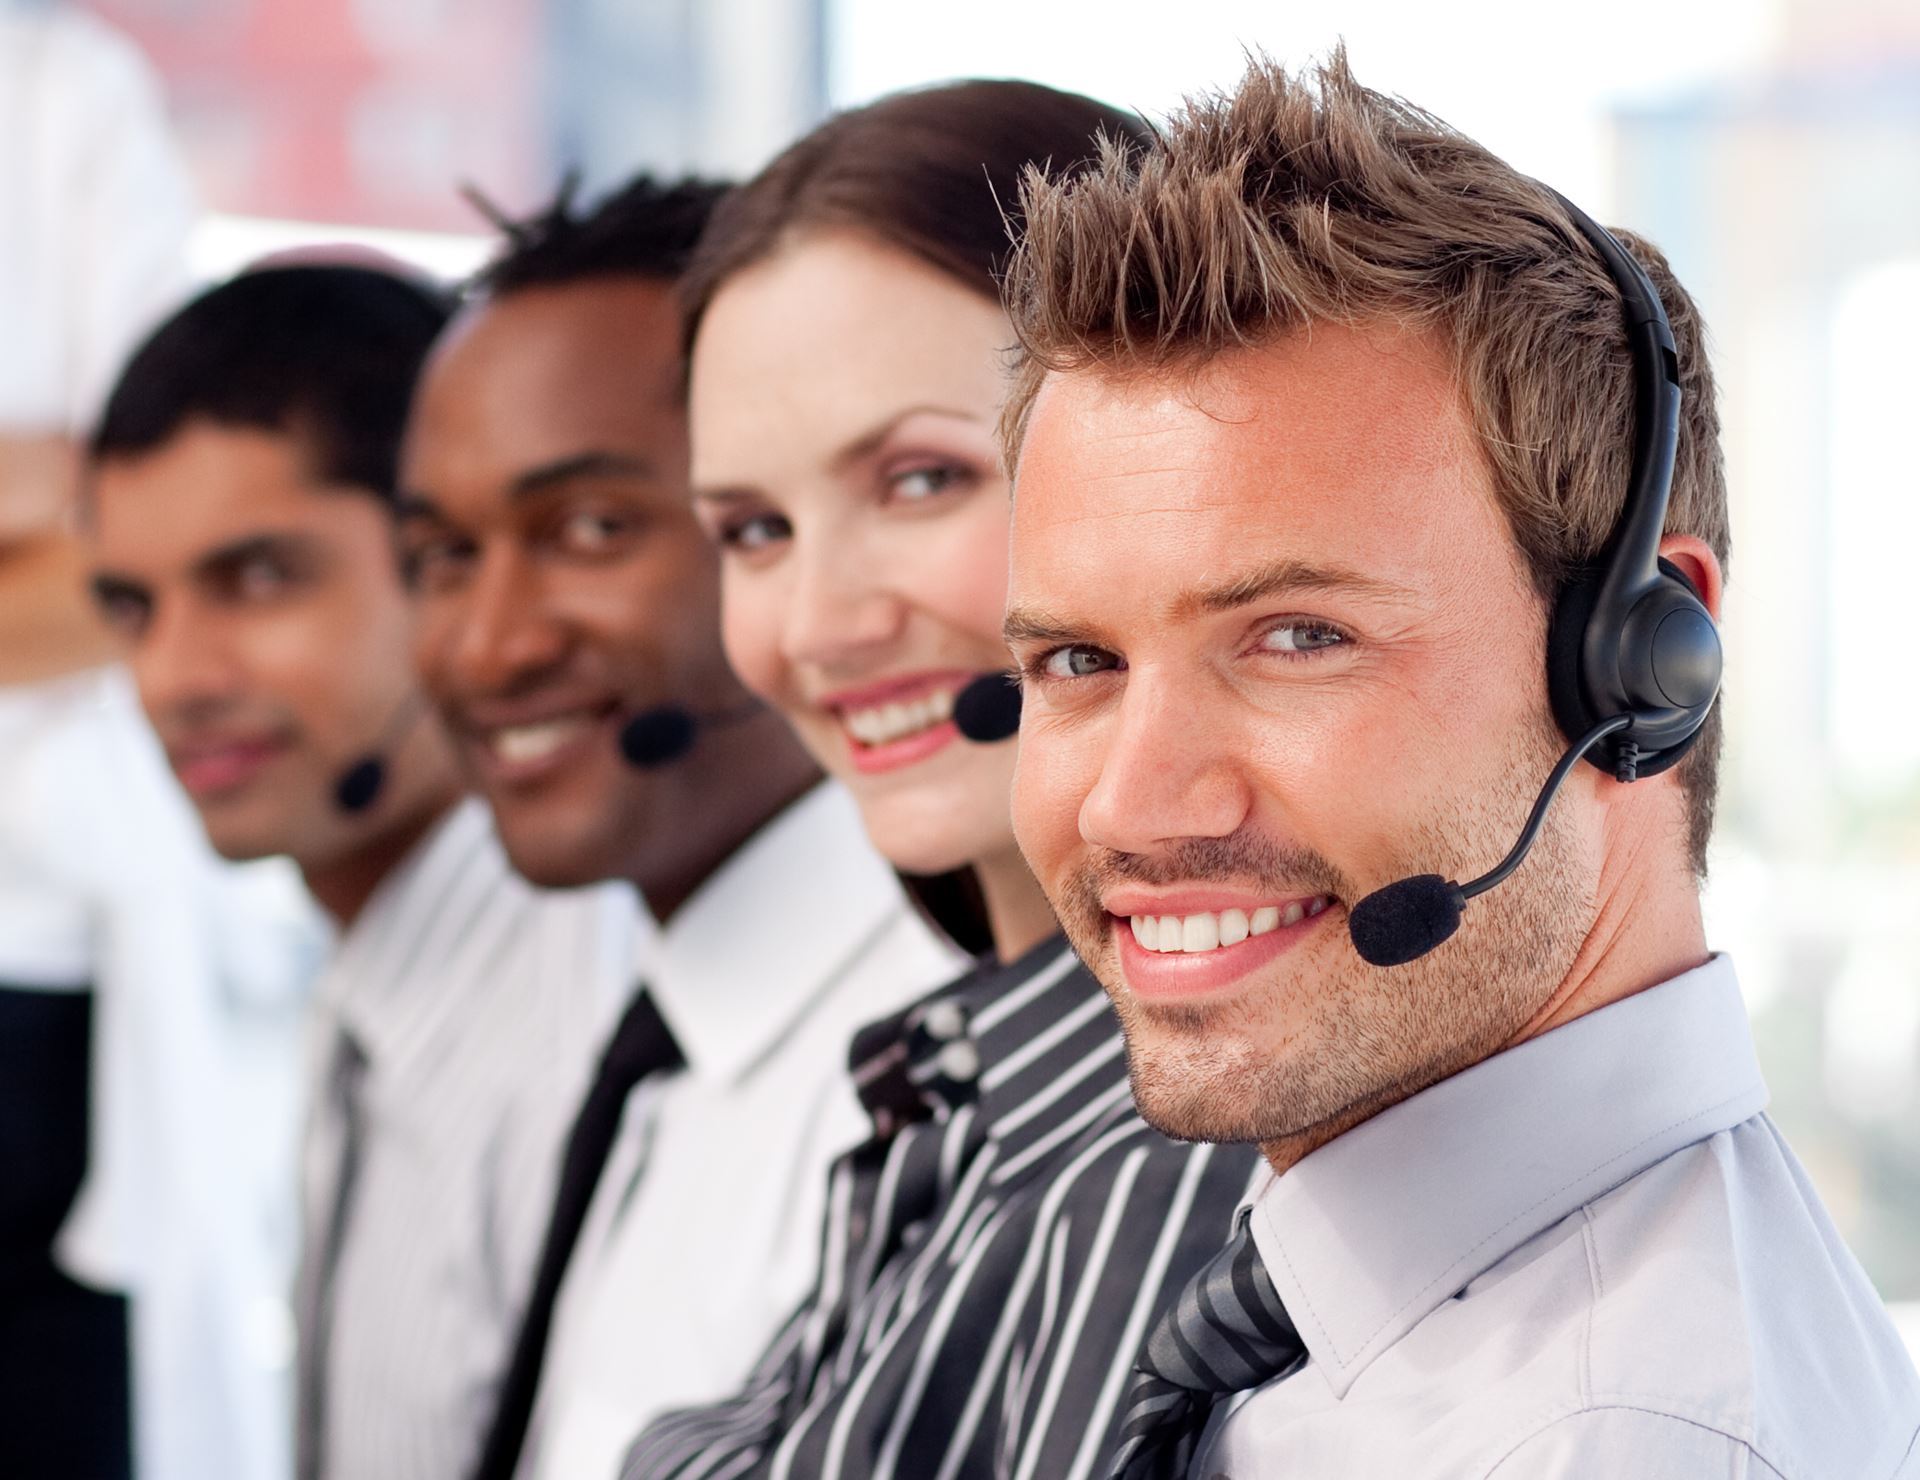 image-of-call-center-people